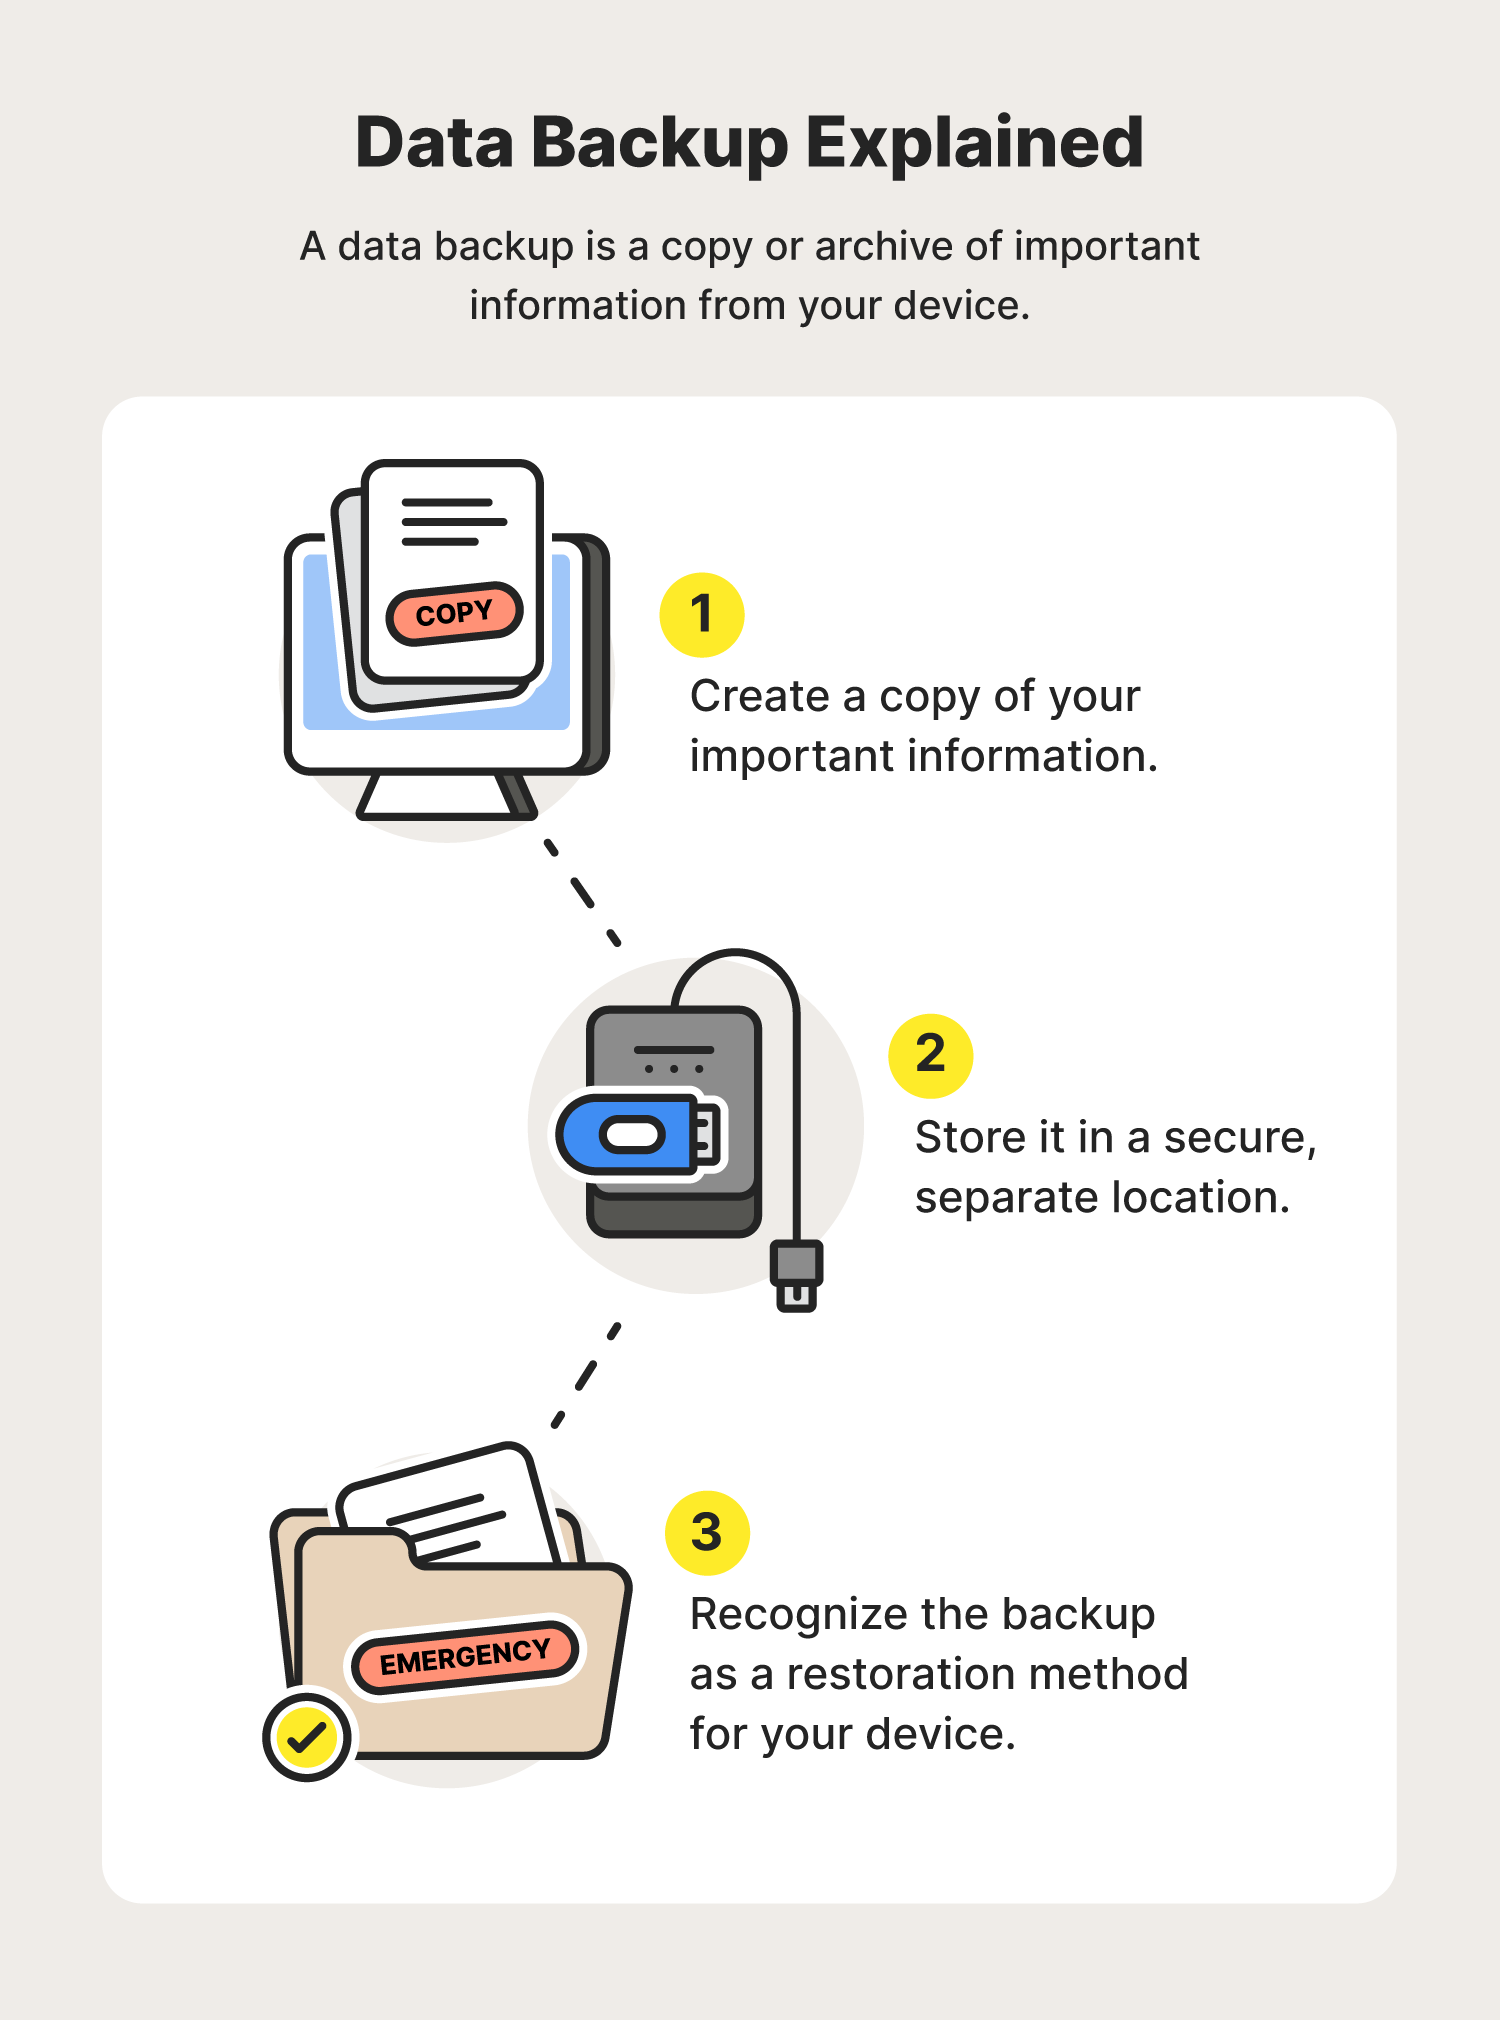 A graphic explains how a data backup works.